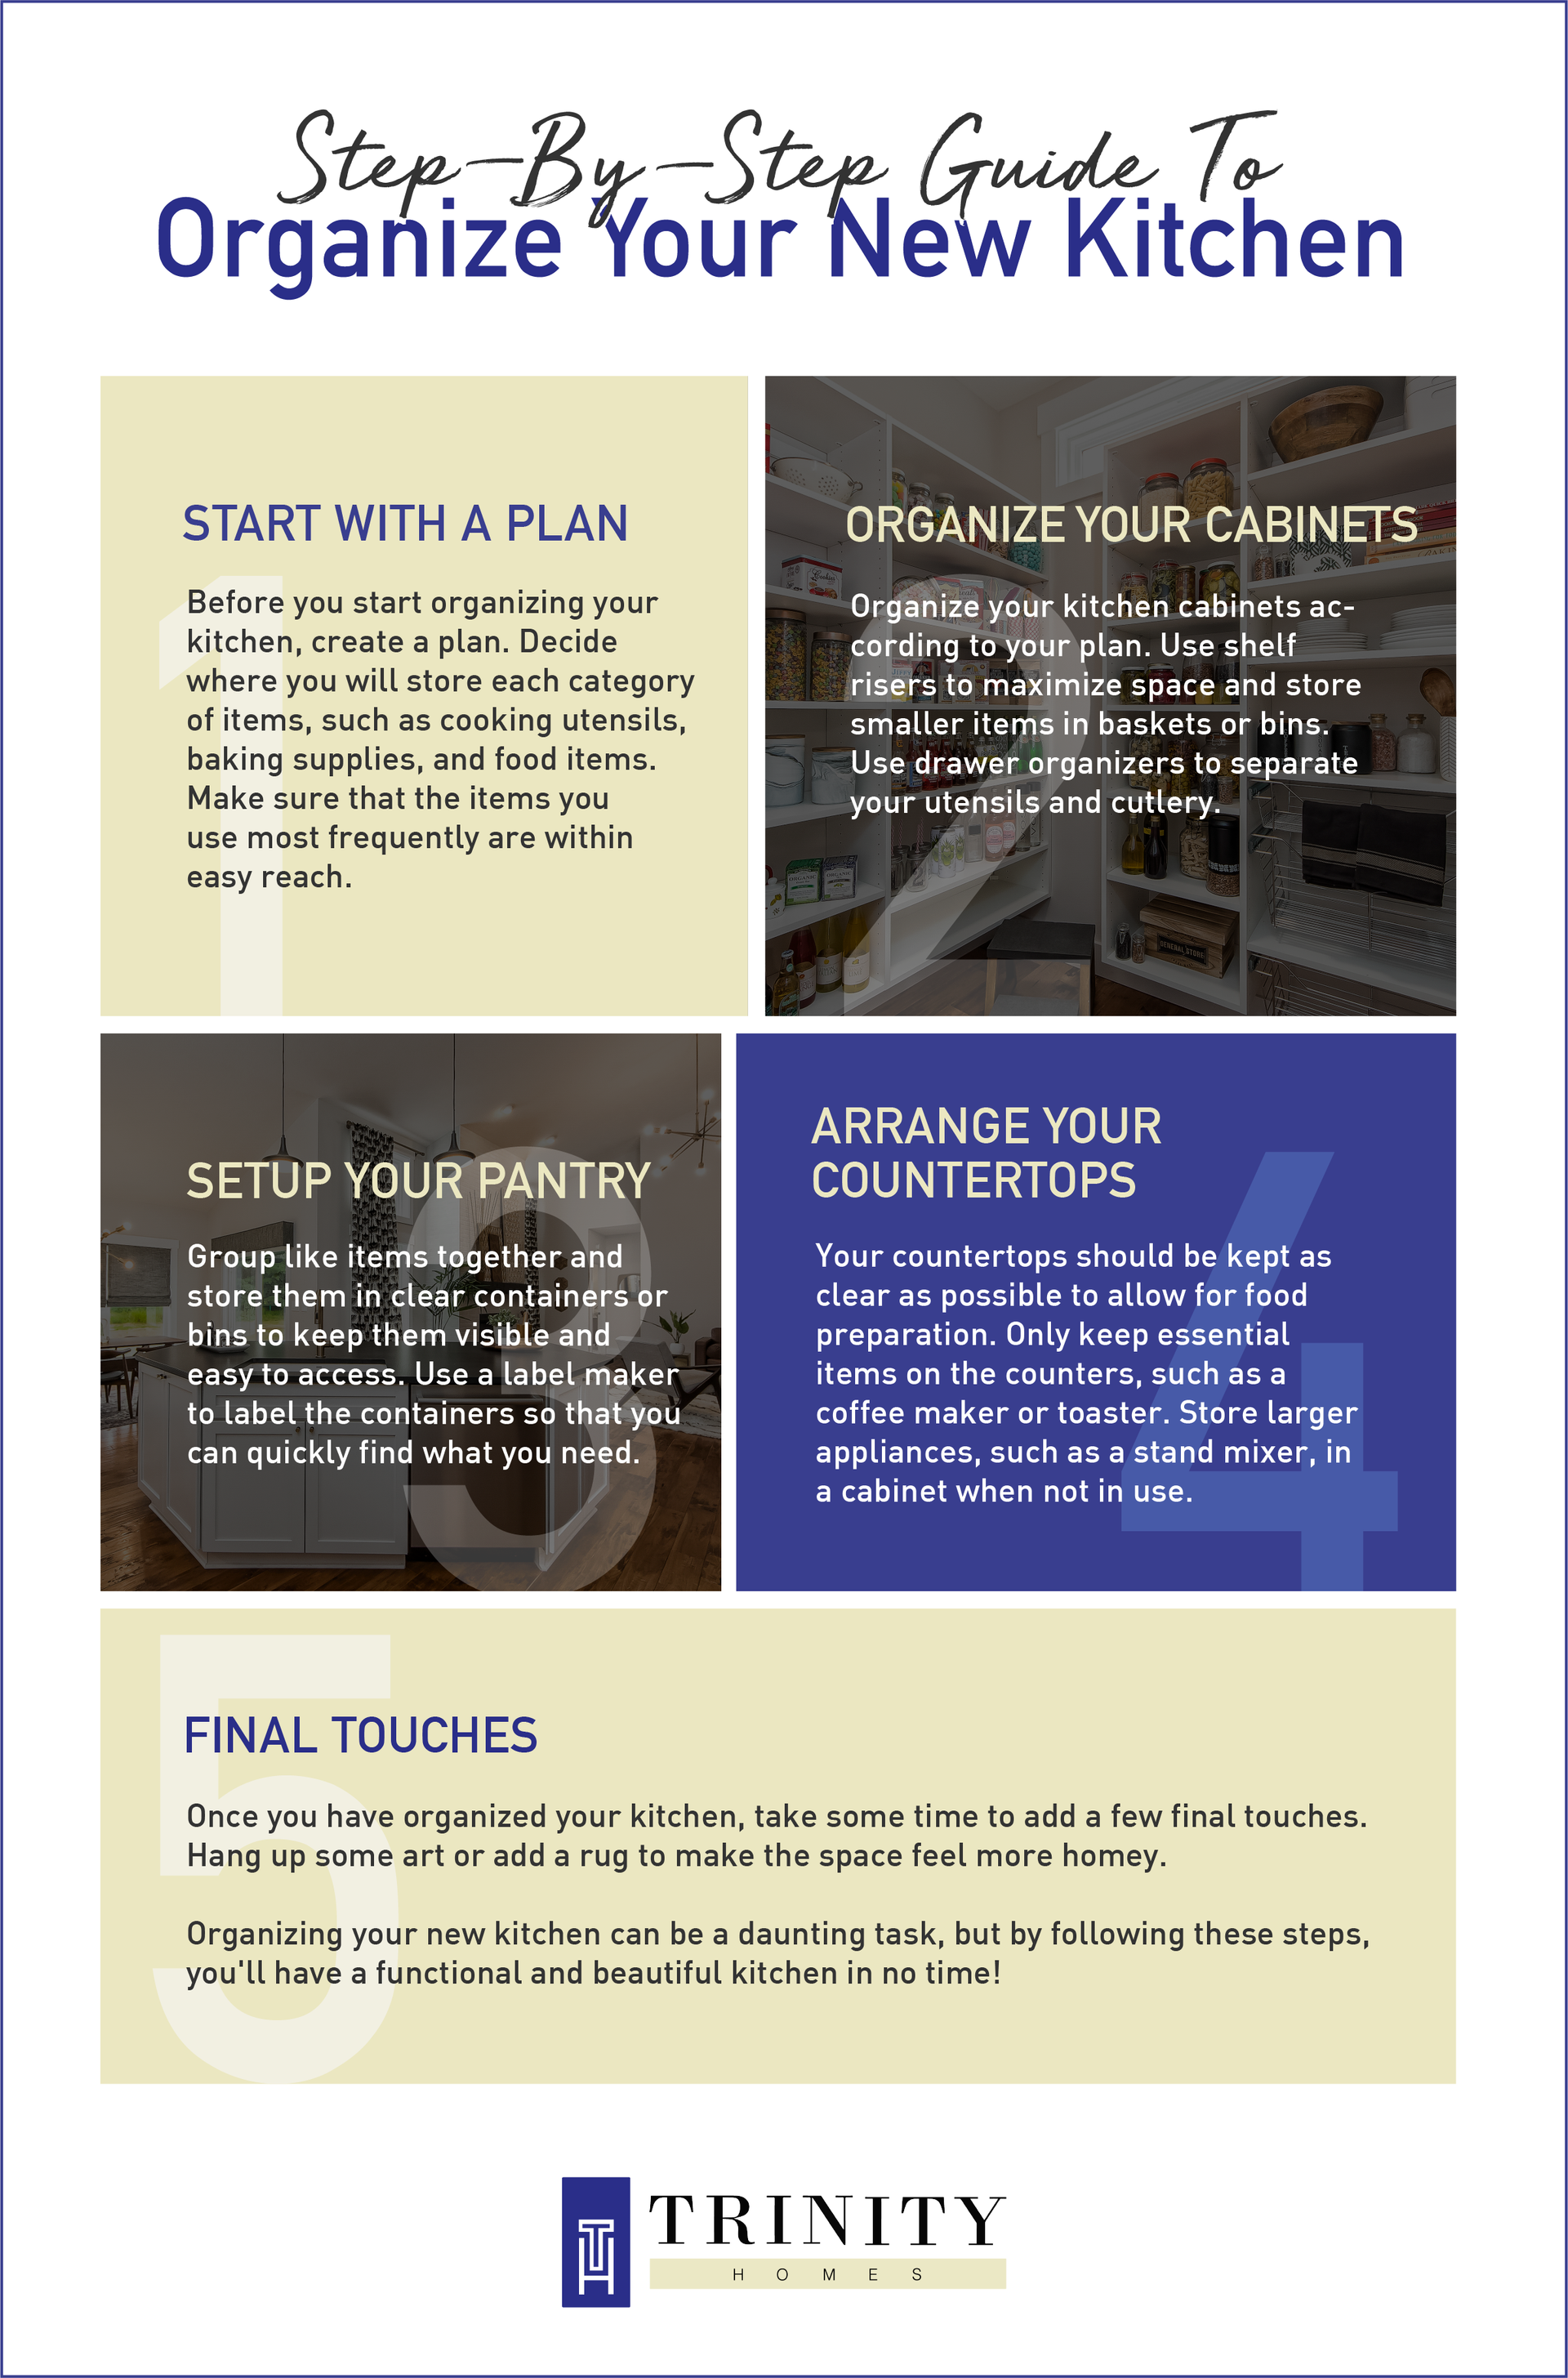 Step by Step Guide to Organize Your New Kitchen